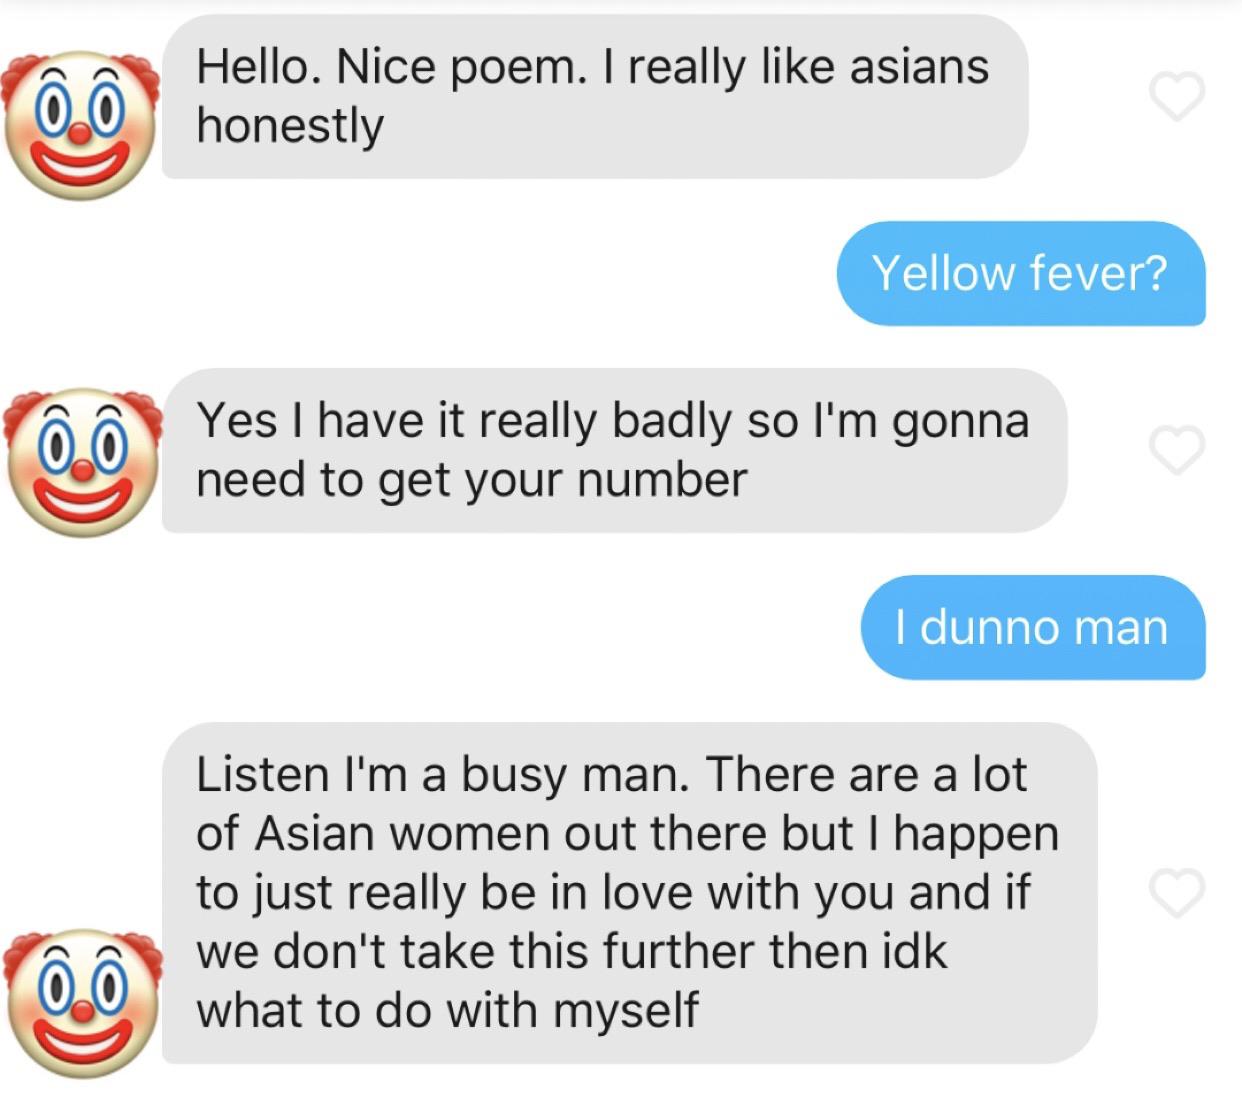 organization - 0.0 Hello. Nice poem. I really asians honestly Yellow fever? Yes I have it really badly so I'm gonna need to get your number I dunno man Listen I'm a busy man. There are a lot of Asian women out there but I happen to just really be in love 